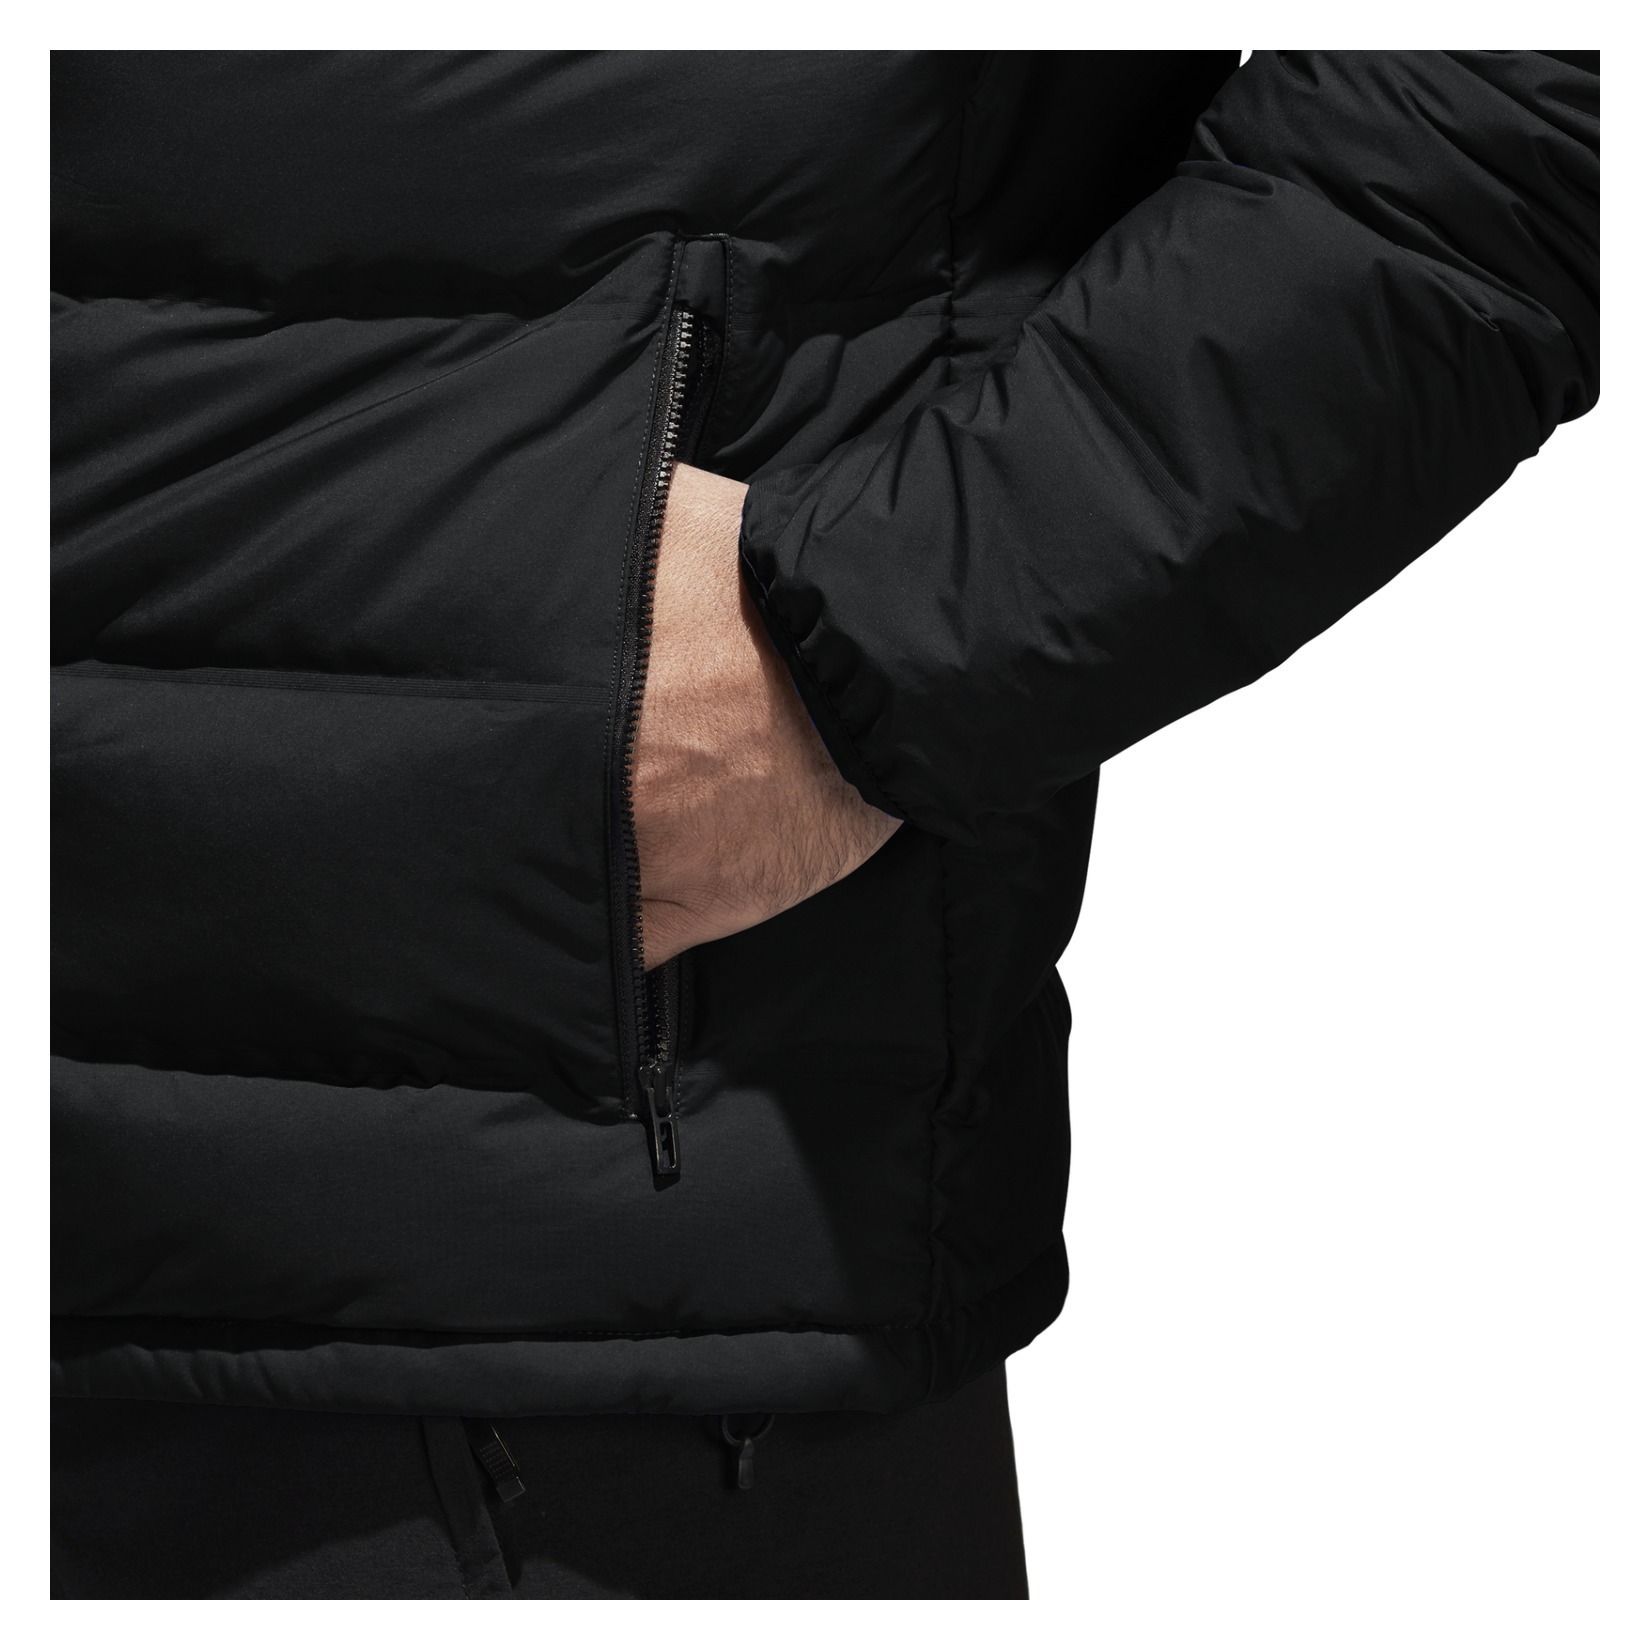 Adidas Helionic Jacket Review Outlet, 53% OFF | centro-innato.com